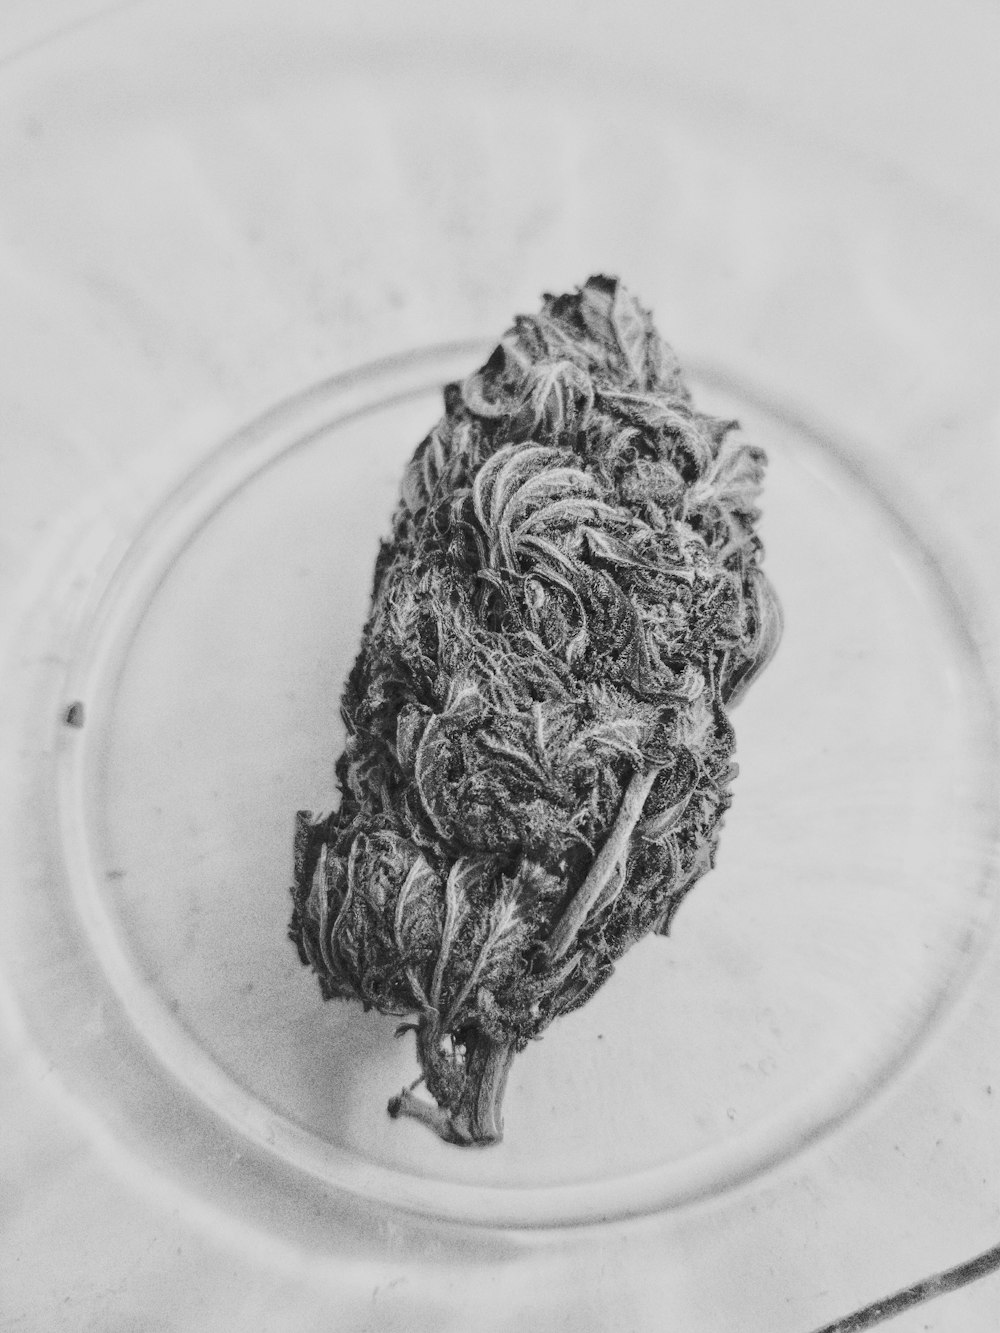 grayscale photo of dried leaf on white ceramic plate